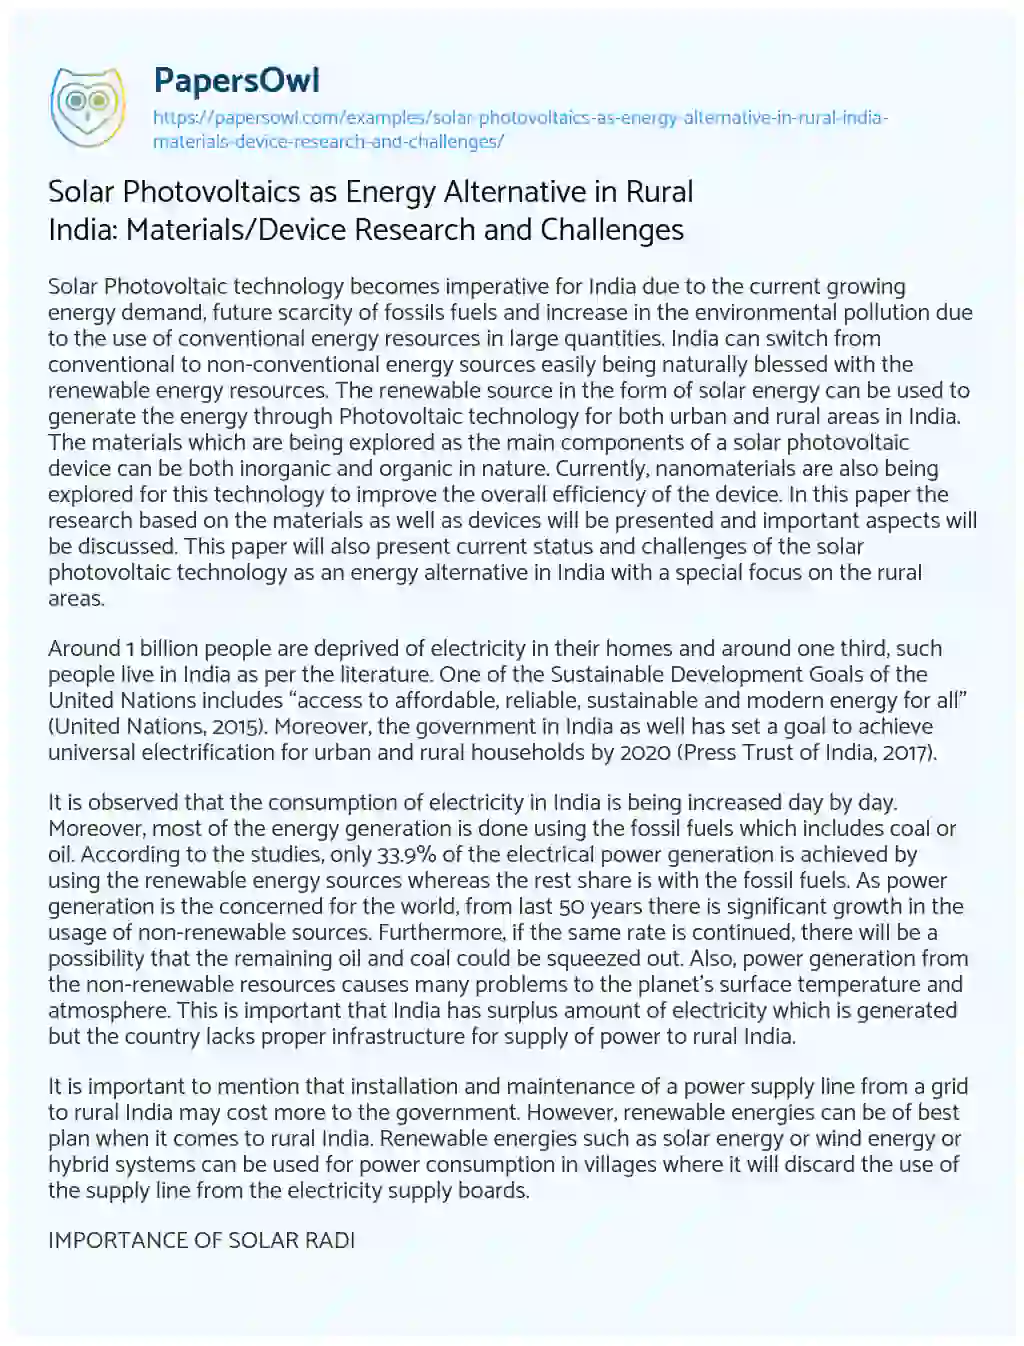 Essay on Solar Photovoltaics as Energy Alternative in Rural India: Materials/Device Research and Challenges